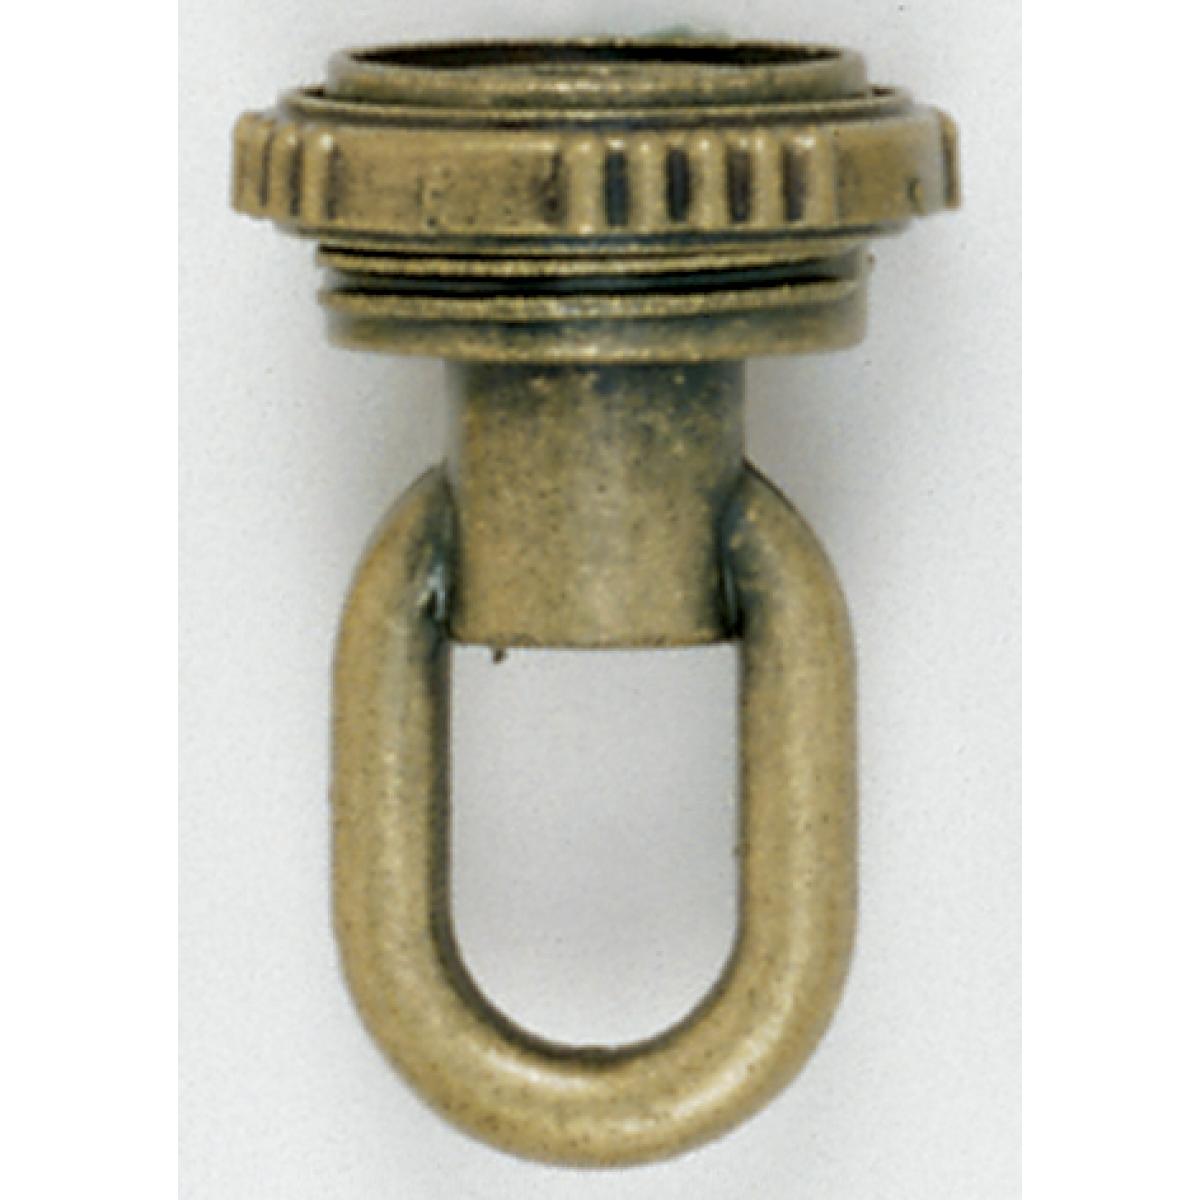 Satco 90-336 1/4 IP Matching Screw Collar Loop With Ring 25lbs Max Antique Brass Finish